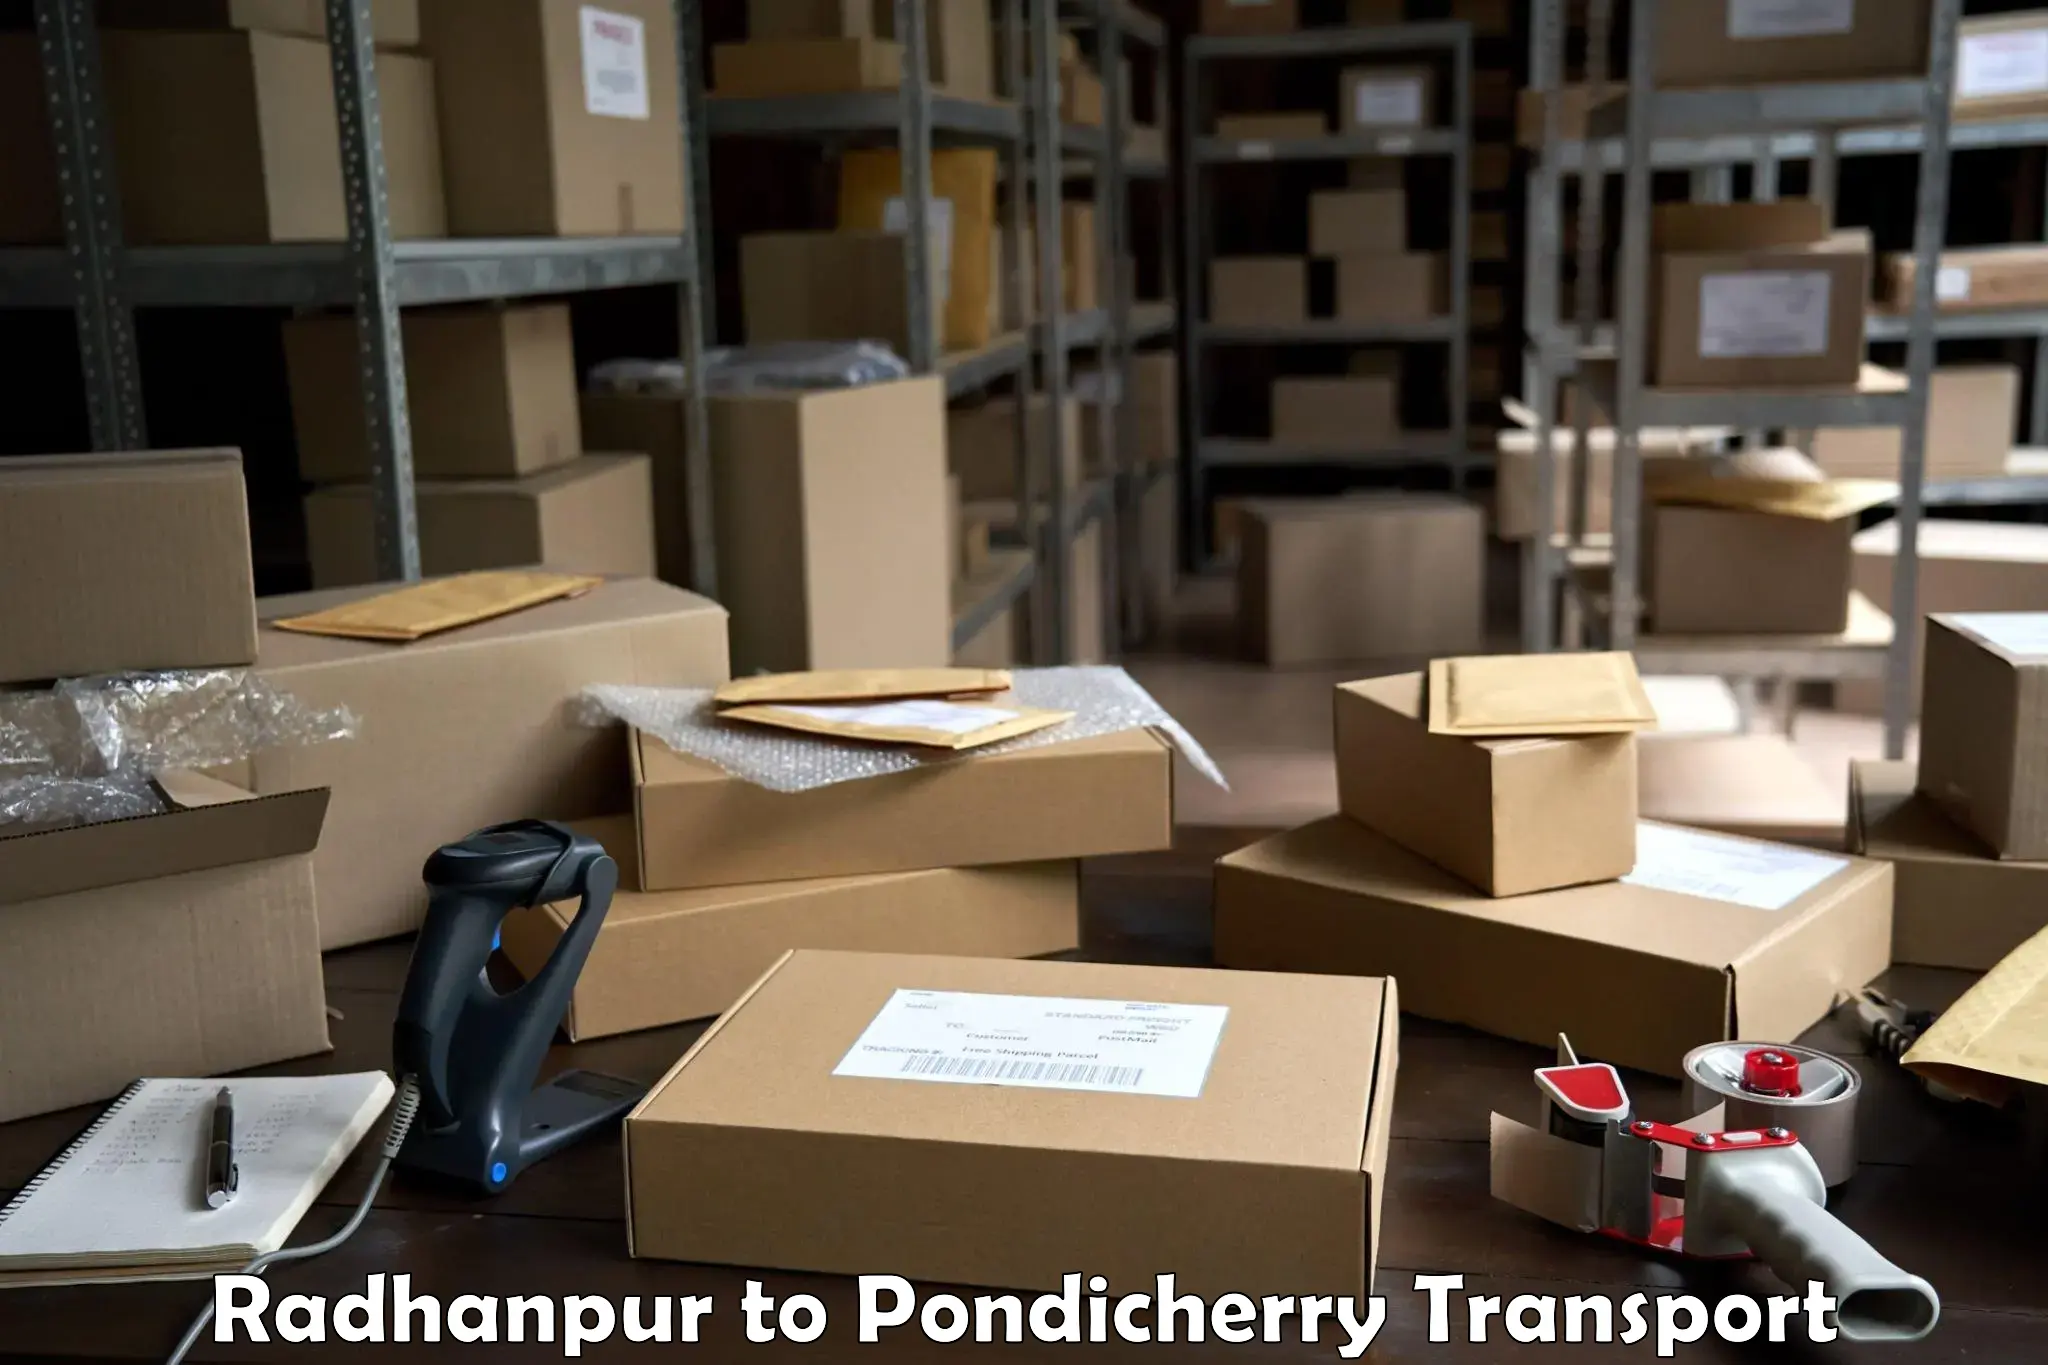 Commercial transport service Radhanpur to Pondicherry